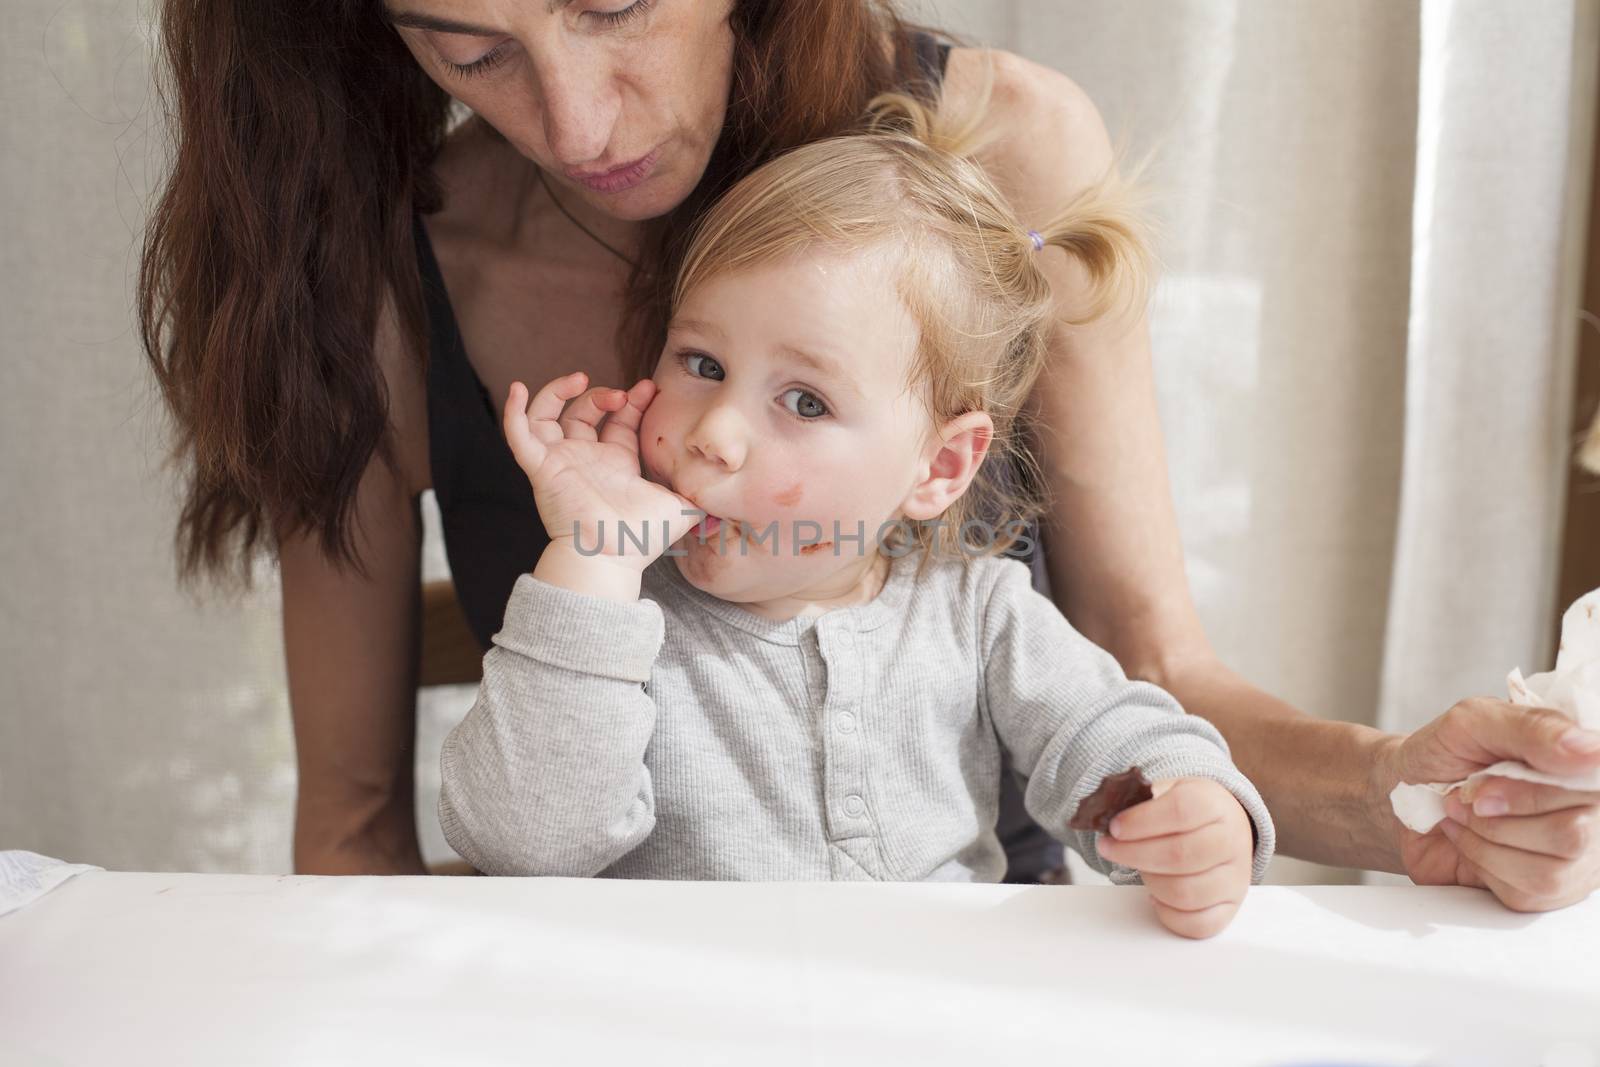 portrait of two years age blonde baby with grey shirt sucking her thumb finger eating chocolate piece sitting on legs of mother woman black shirt in white table